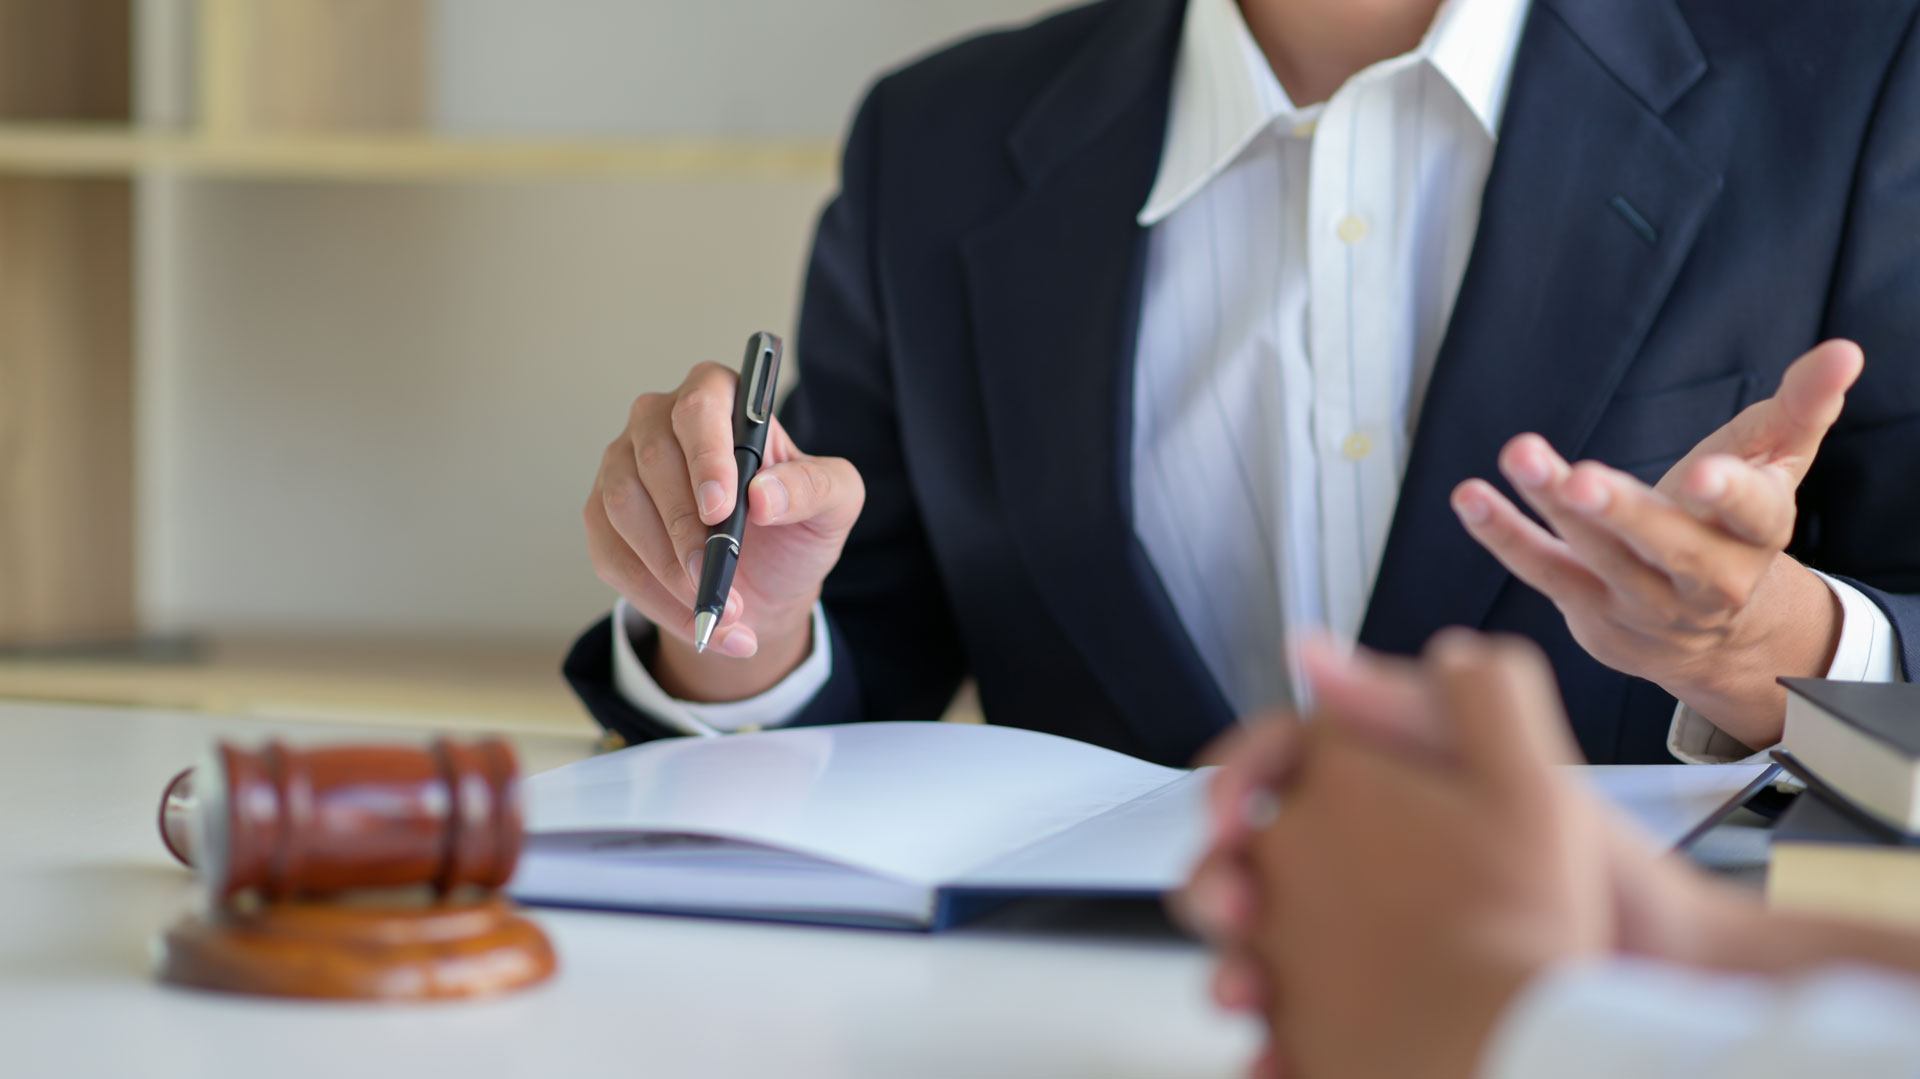 Things to Consider While Hiring Attorney for Legal Aspects of the Business